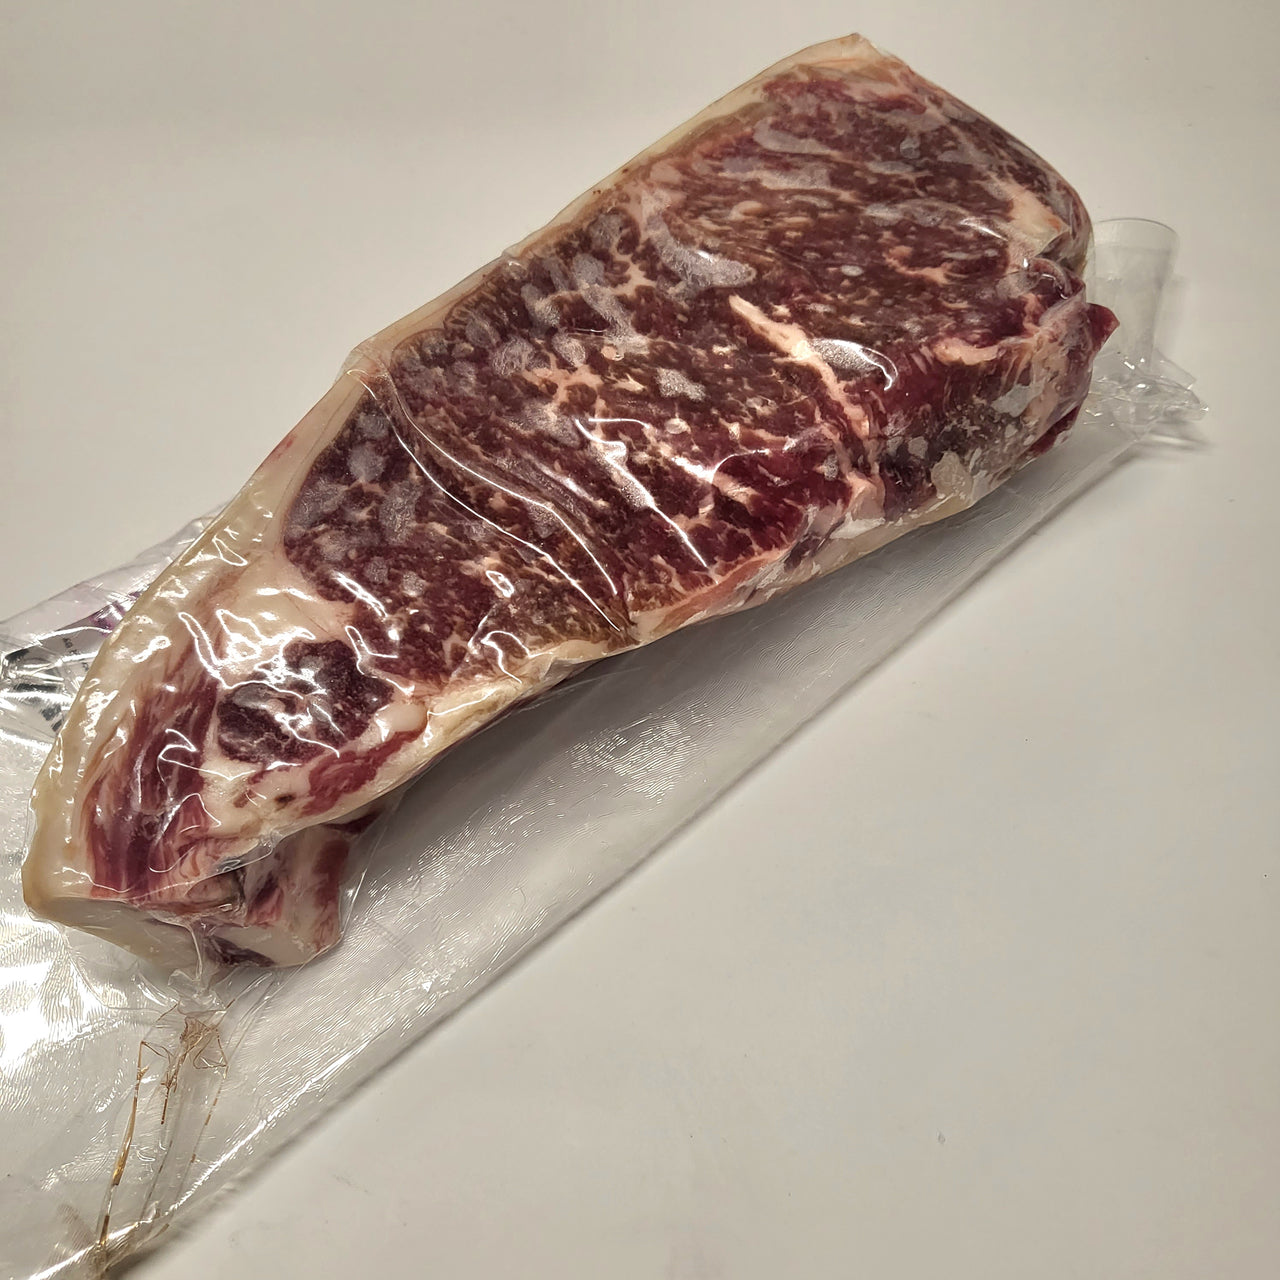 Grass Fed Grass Finished Beef NY Strip Steak Bone OUT Japanese Black Wagyu Beef Full Blood AGED 21+ Days